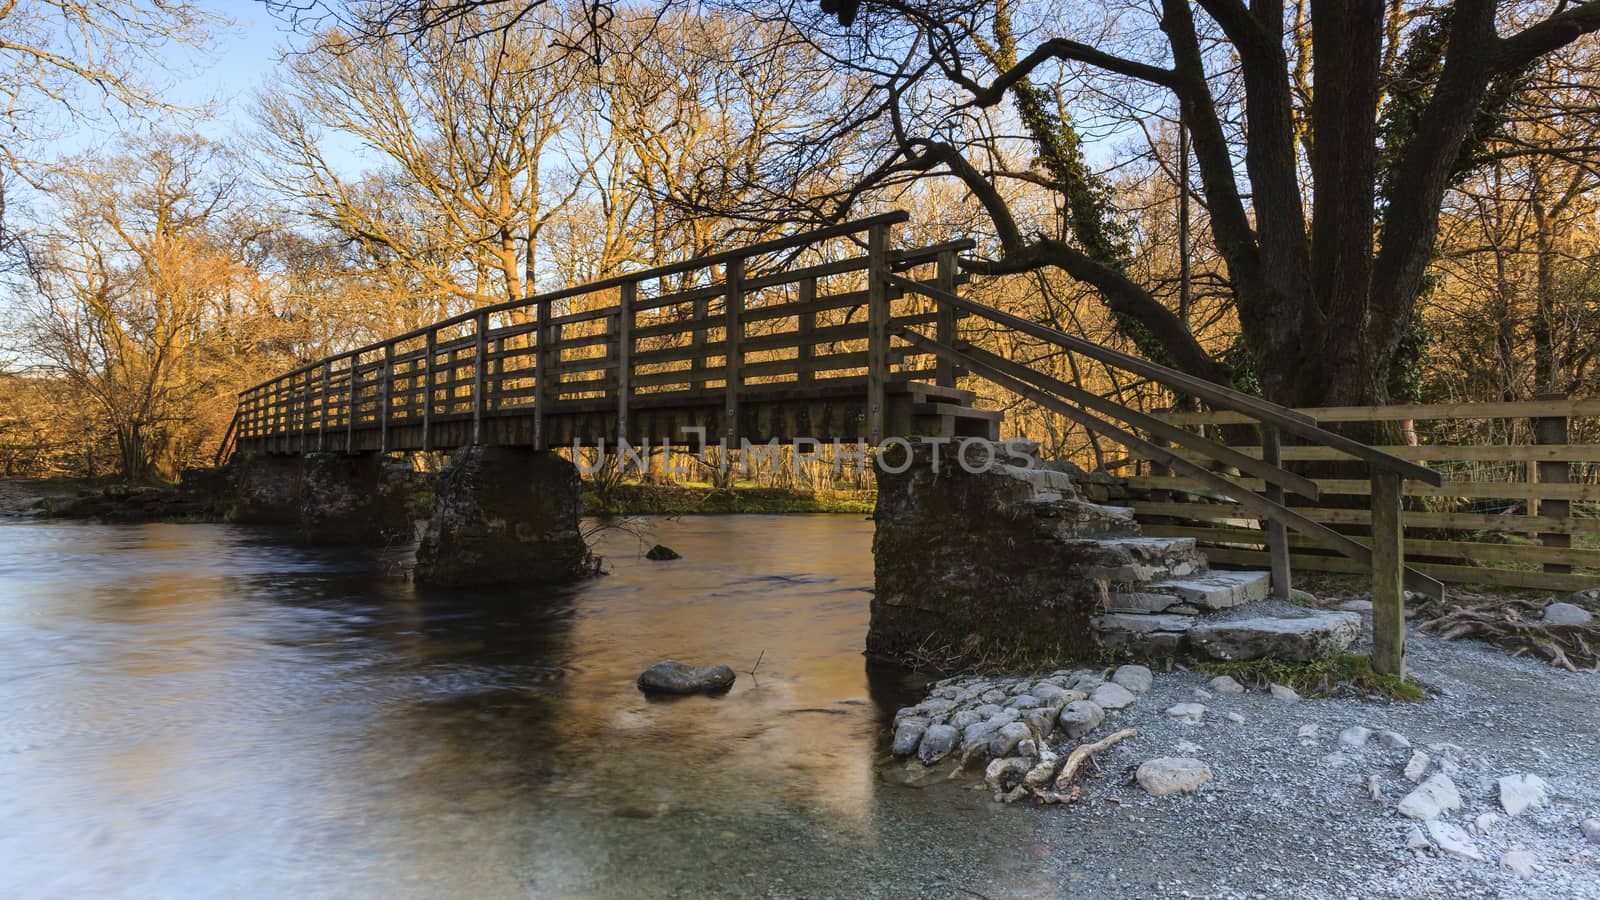 A wooden footbridge over a river between Grasmere and Rydal Water in the English Lake District national park.